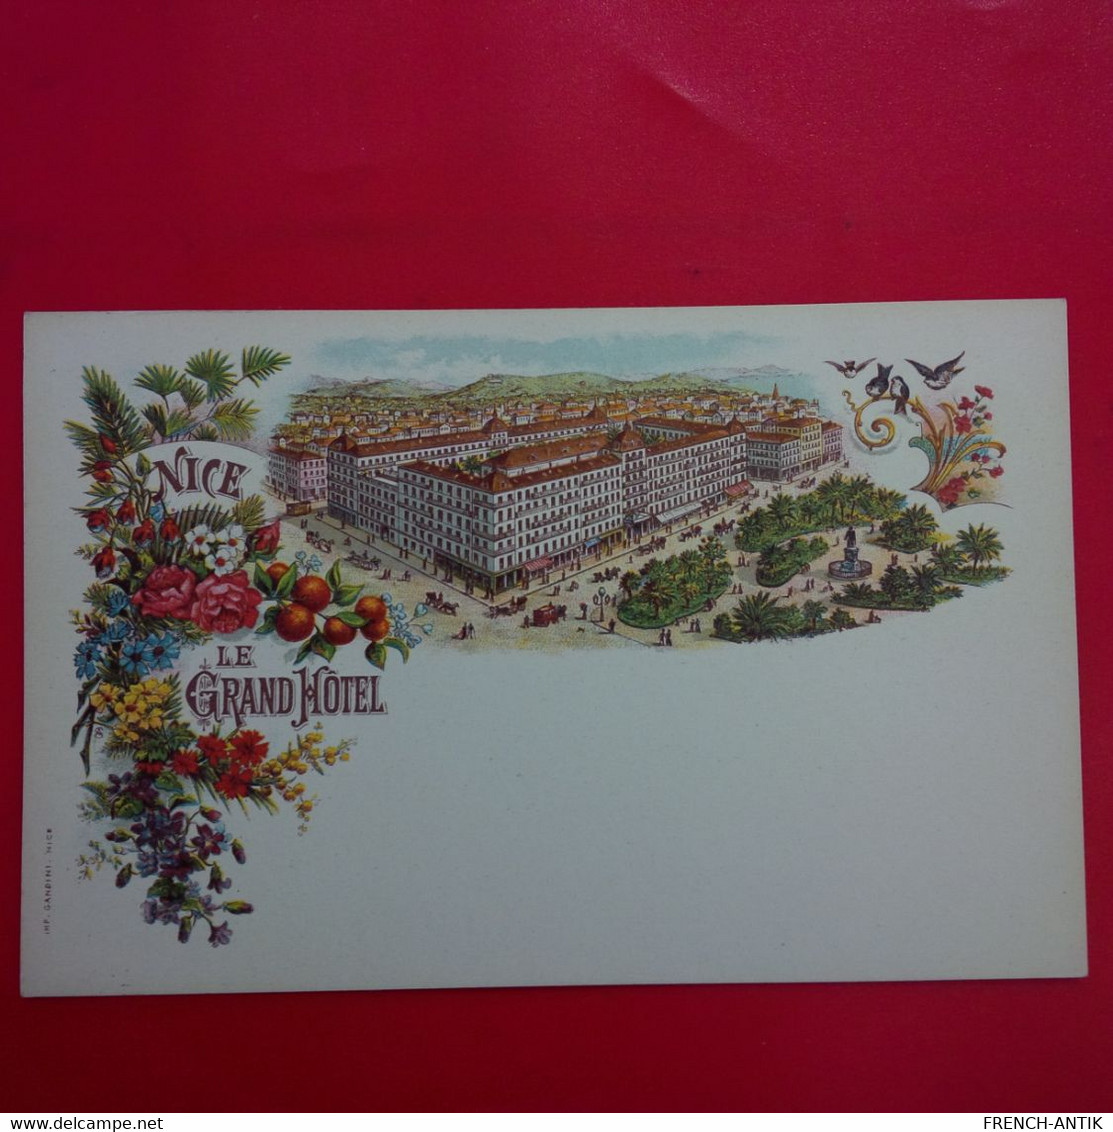 NICE LE GRAND HOTEL LITHOGRAPHIE - Pubs, Hotels And Restaurants